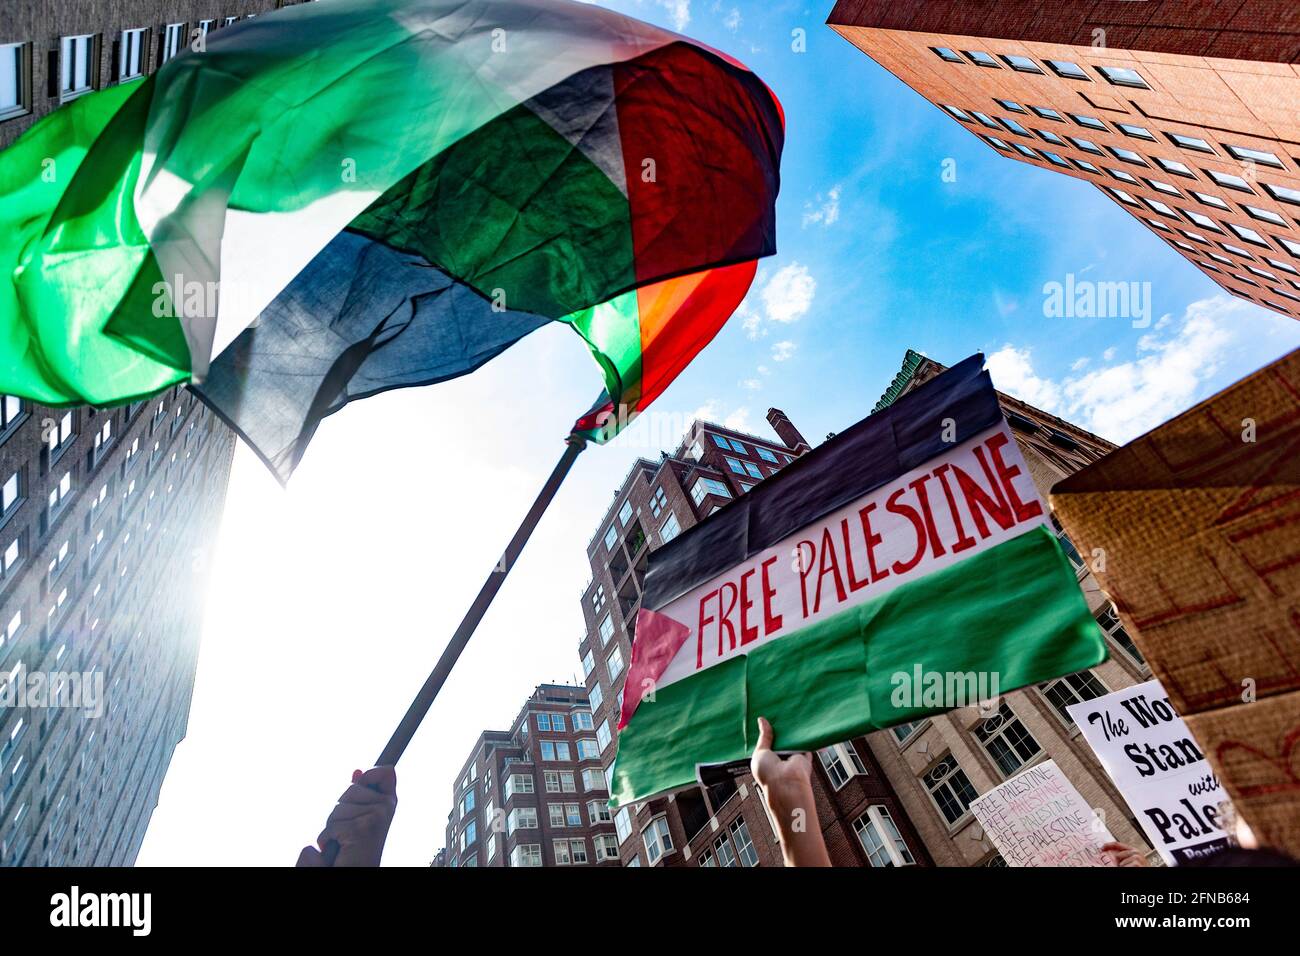 May 15, 2021, Boston, Massachusetts, USA: 'Free Palestine' sign and Palestinian flag during a rally in solidarity with the Palestinian people amid the ongoing conflict with Israel in Boston. Credit: Keiko Hiromi/AFLO/Alamy Live News Stock Photo